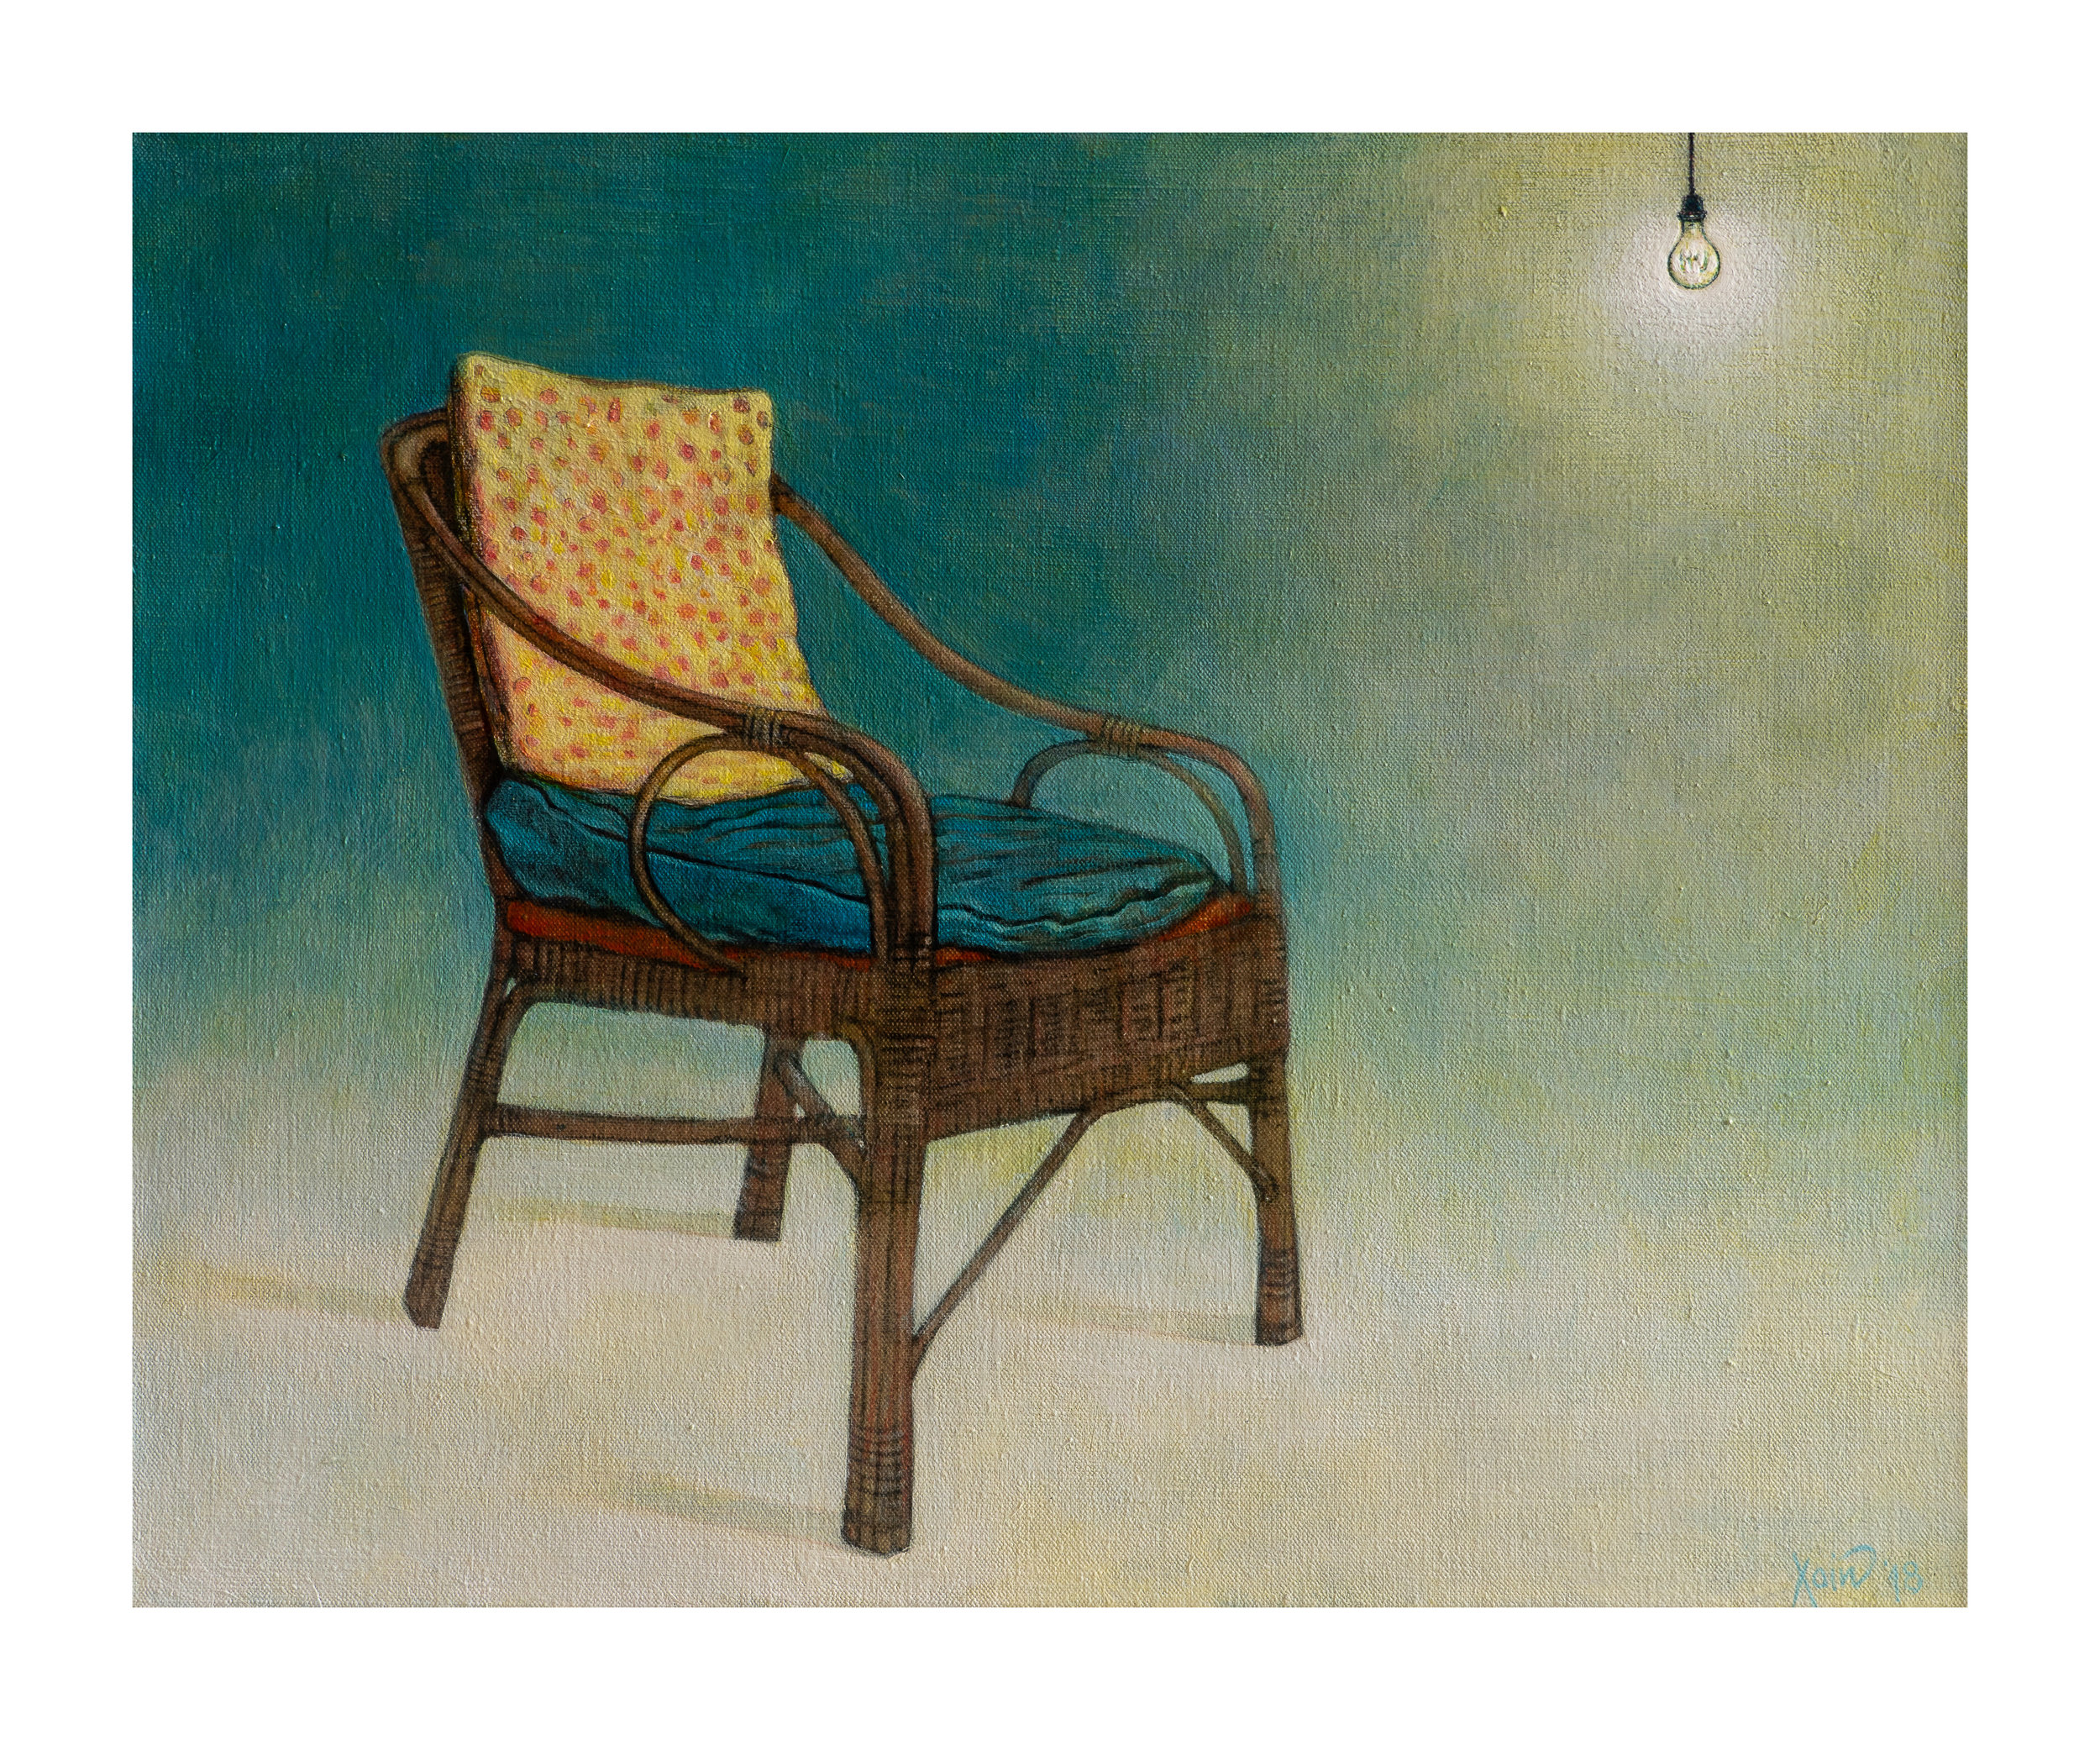 "Old chair with lightbulb"